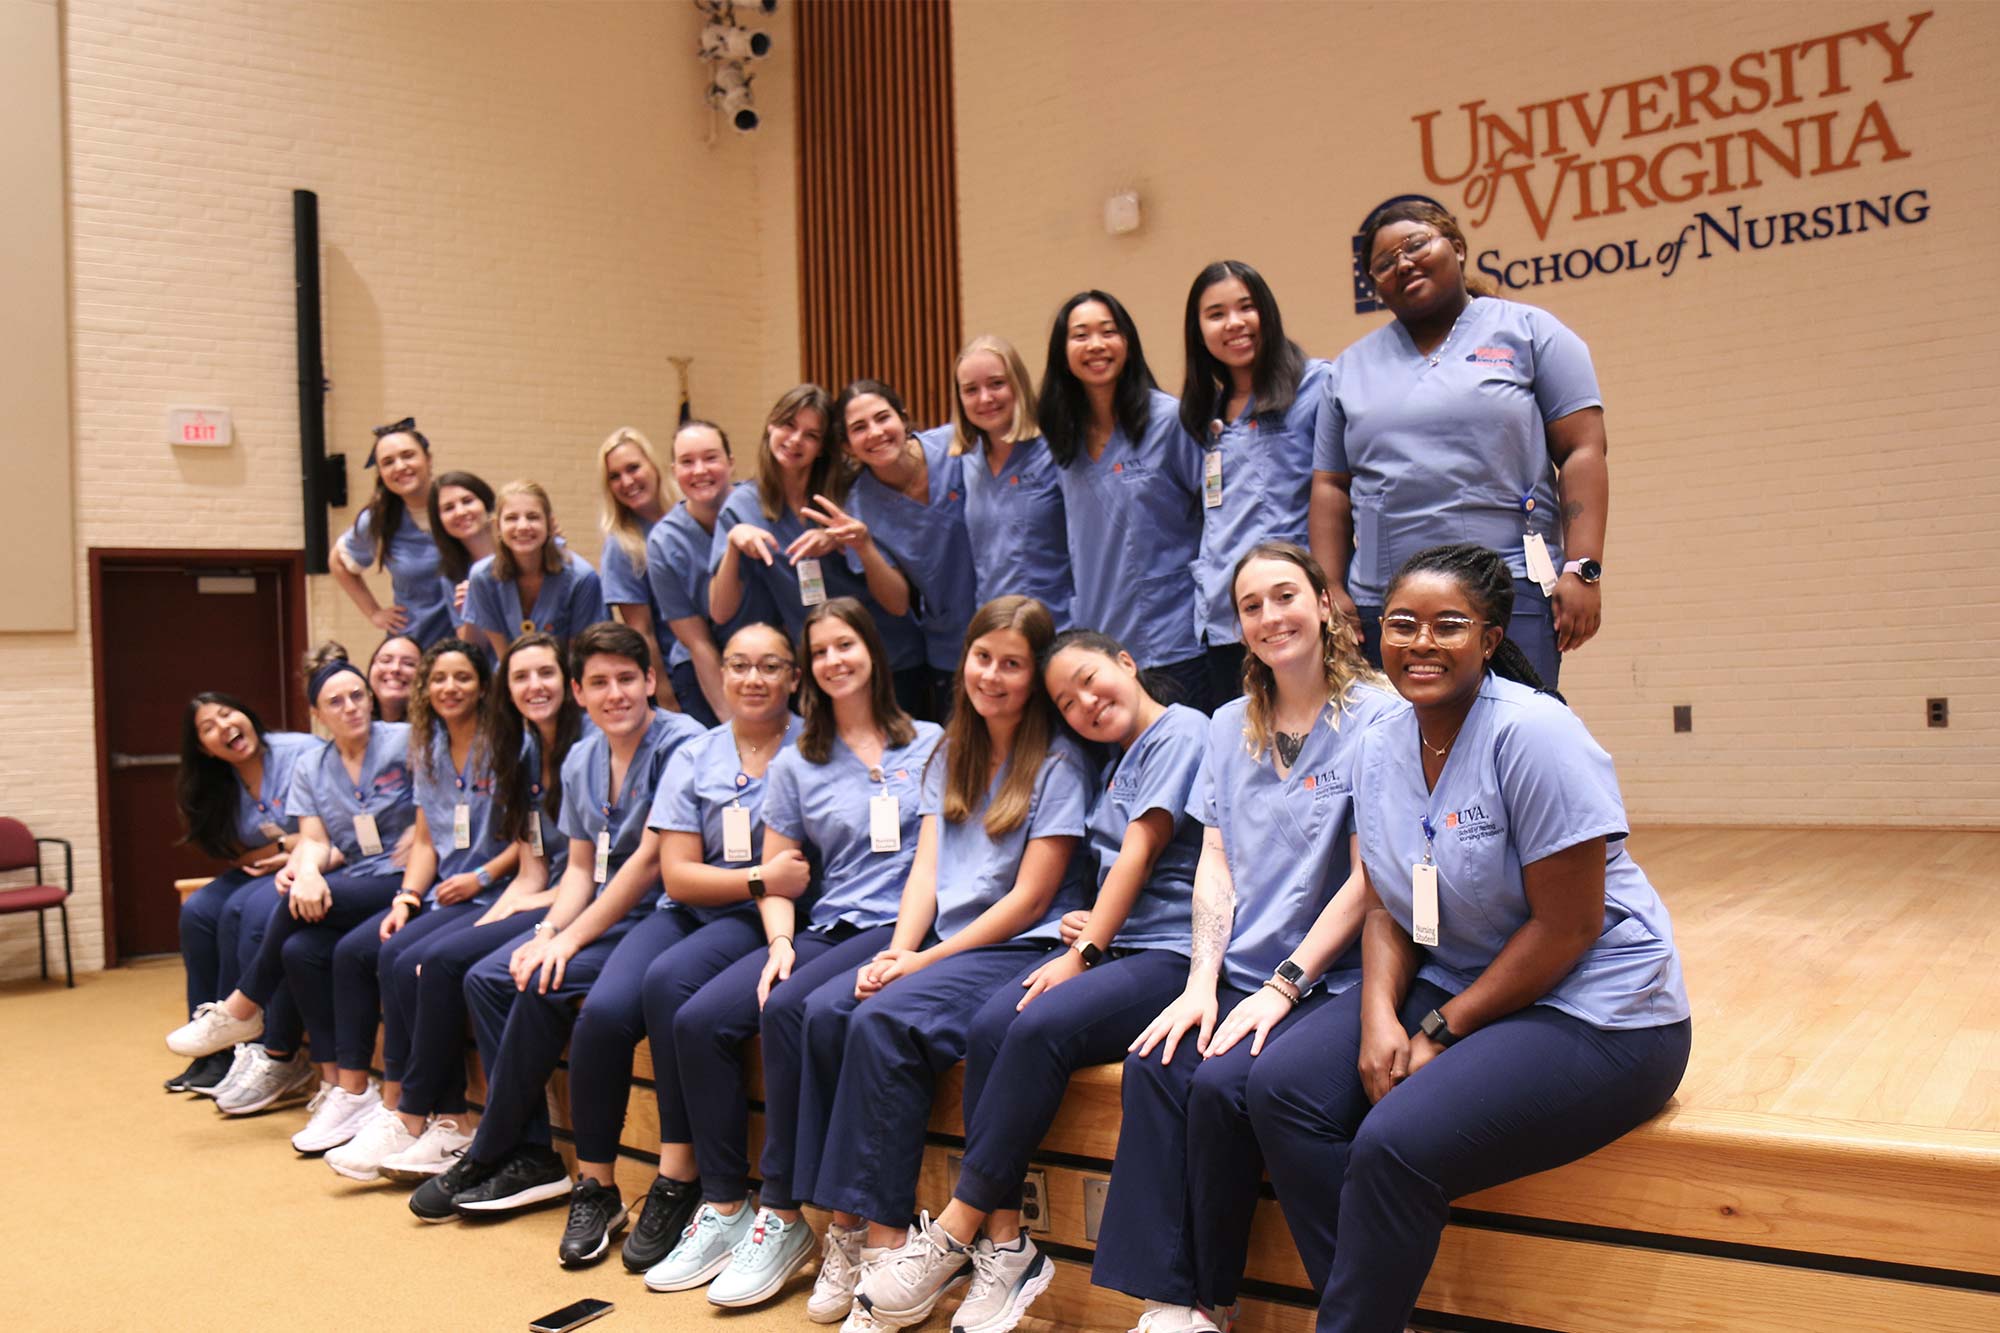 Nursing students sit and stand on a low-rise stage wearing their scrubs in front of a wall that reads "University of Virginia, School of Nursing"